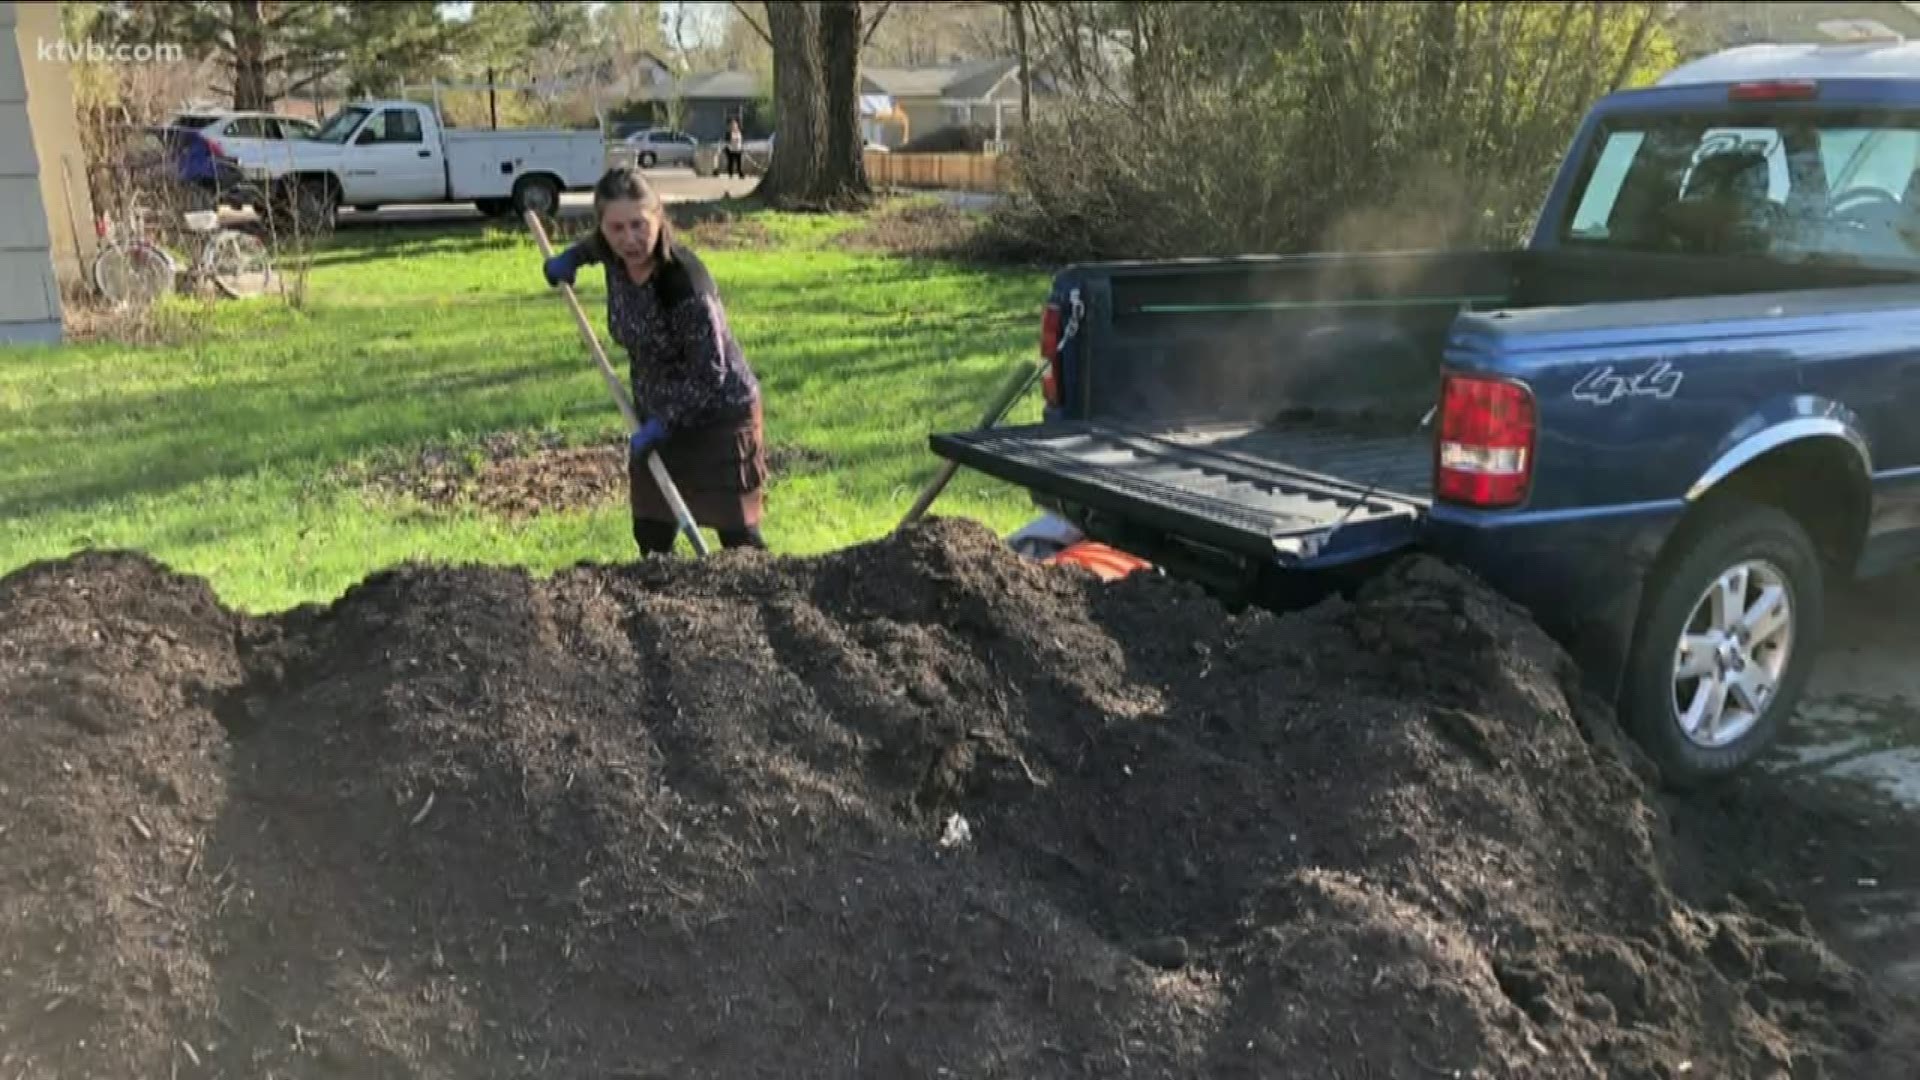 Jim Duthie tells more about the city of Boise's composting program that has been a huge success.